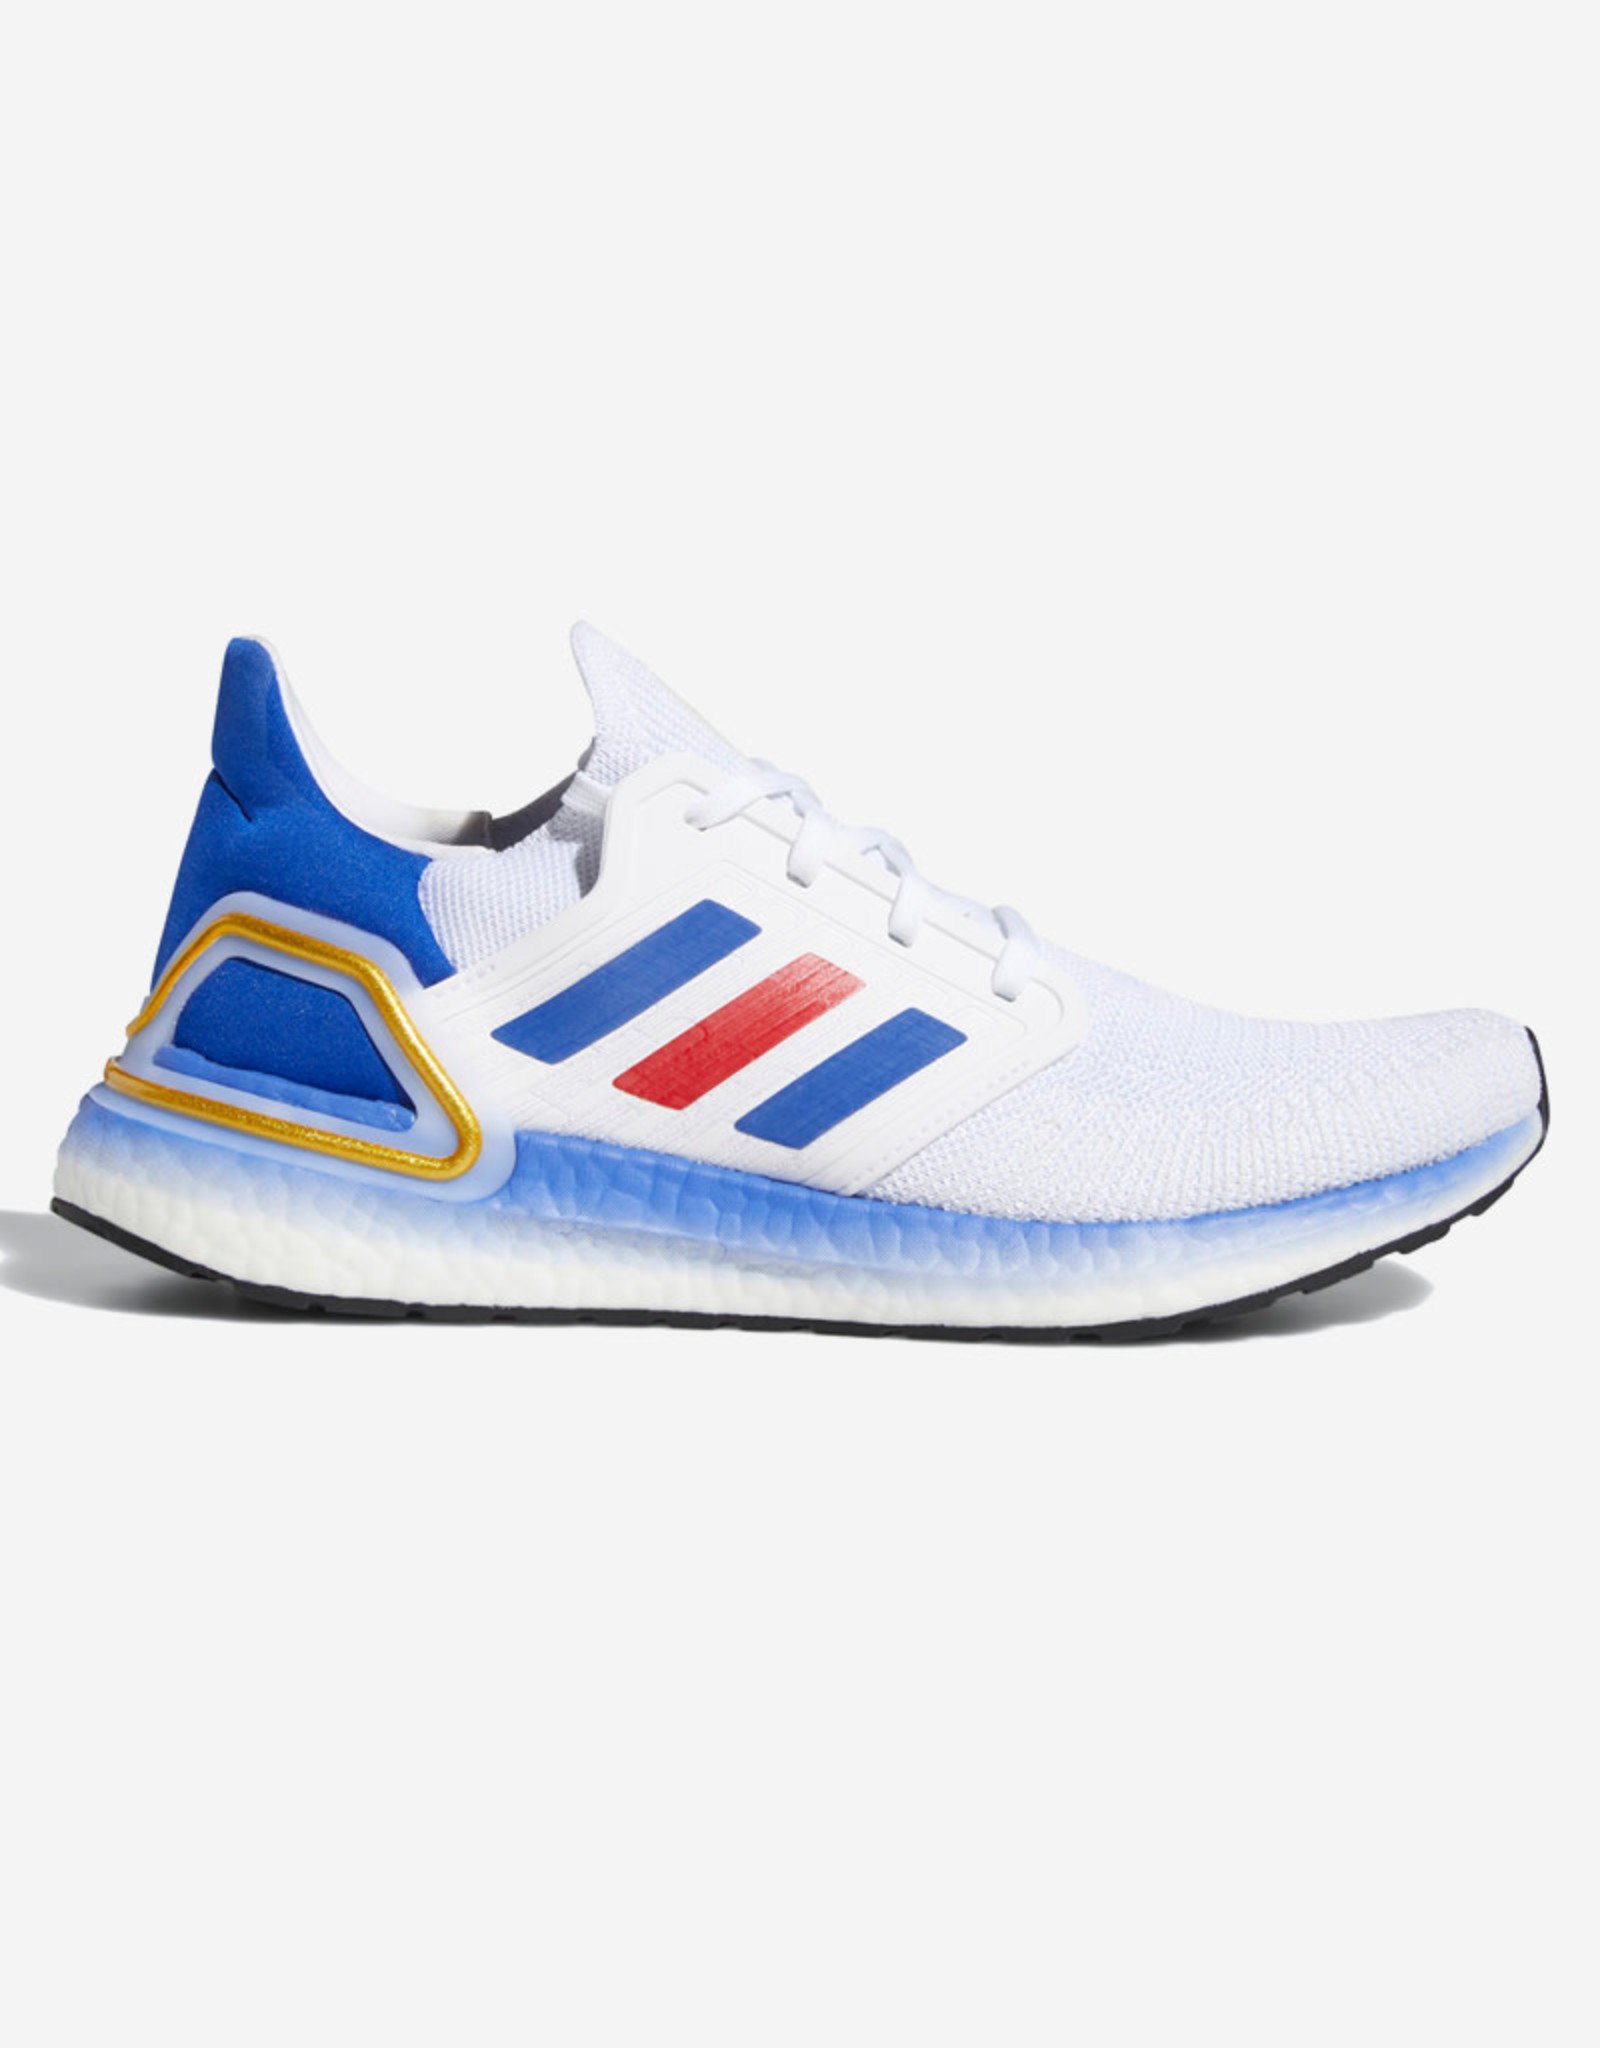 Ultraboost Shoes Cloud White Royal Blue Scarlet Fy9039 Sports Action Store